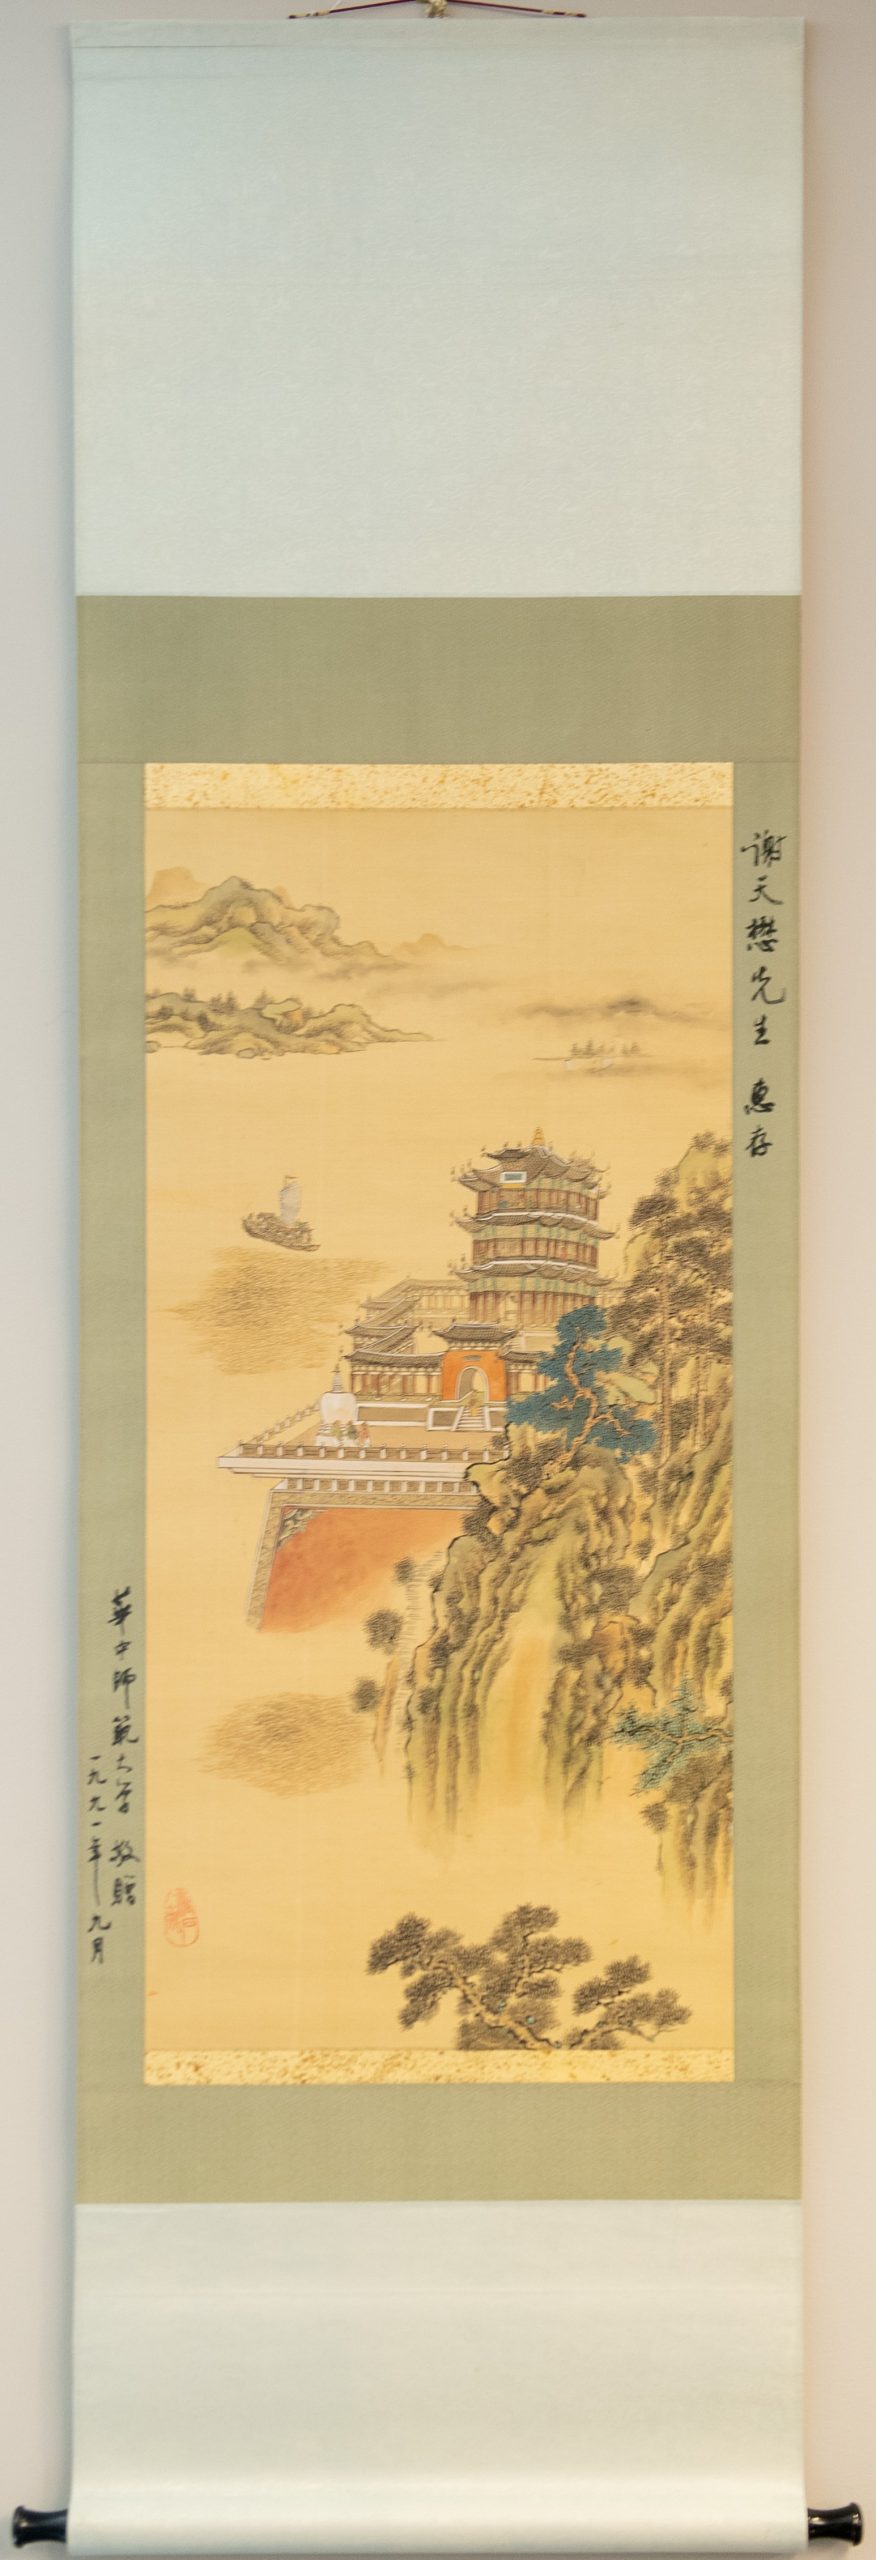 Shinto-style temple scroll